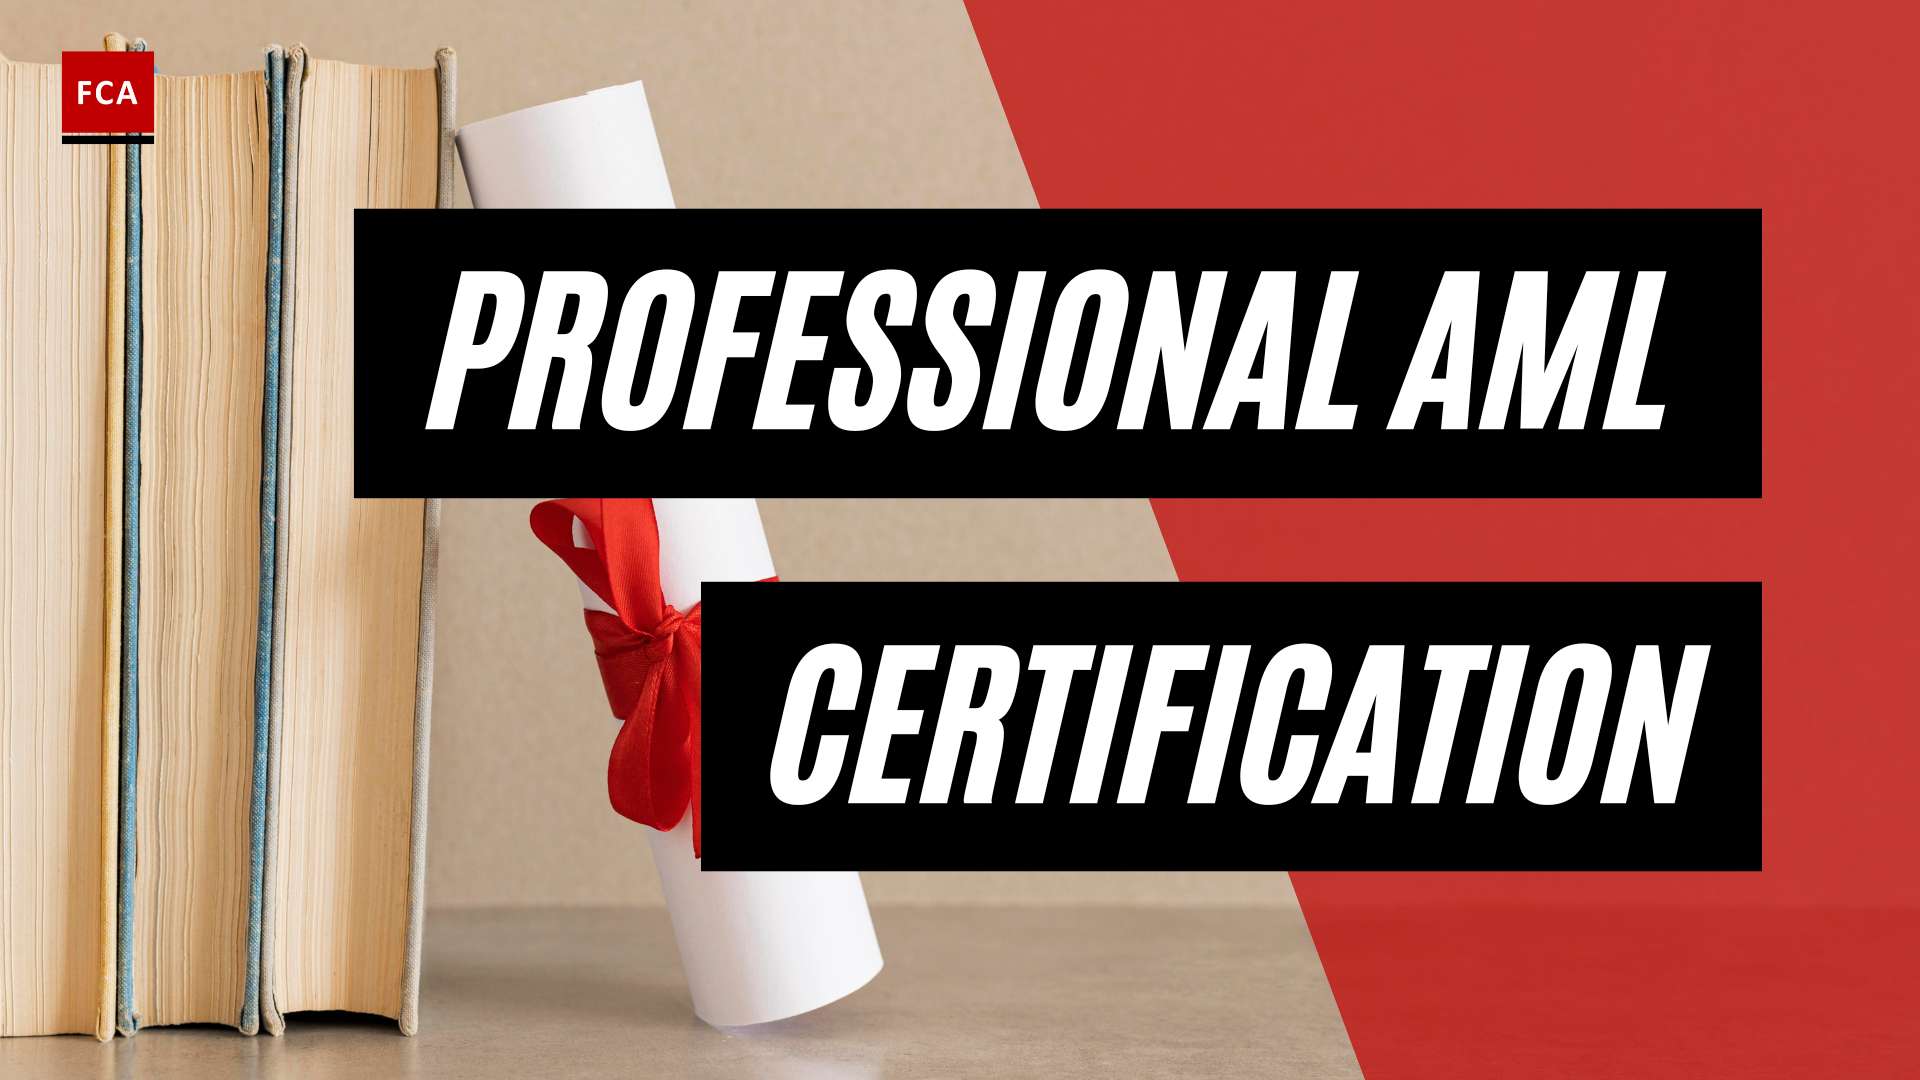 Building Confidence And Competence: Aml Training Certification For Professionals